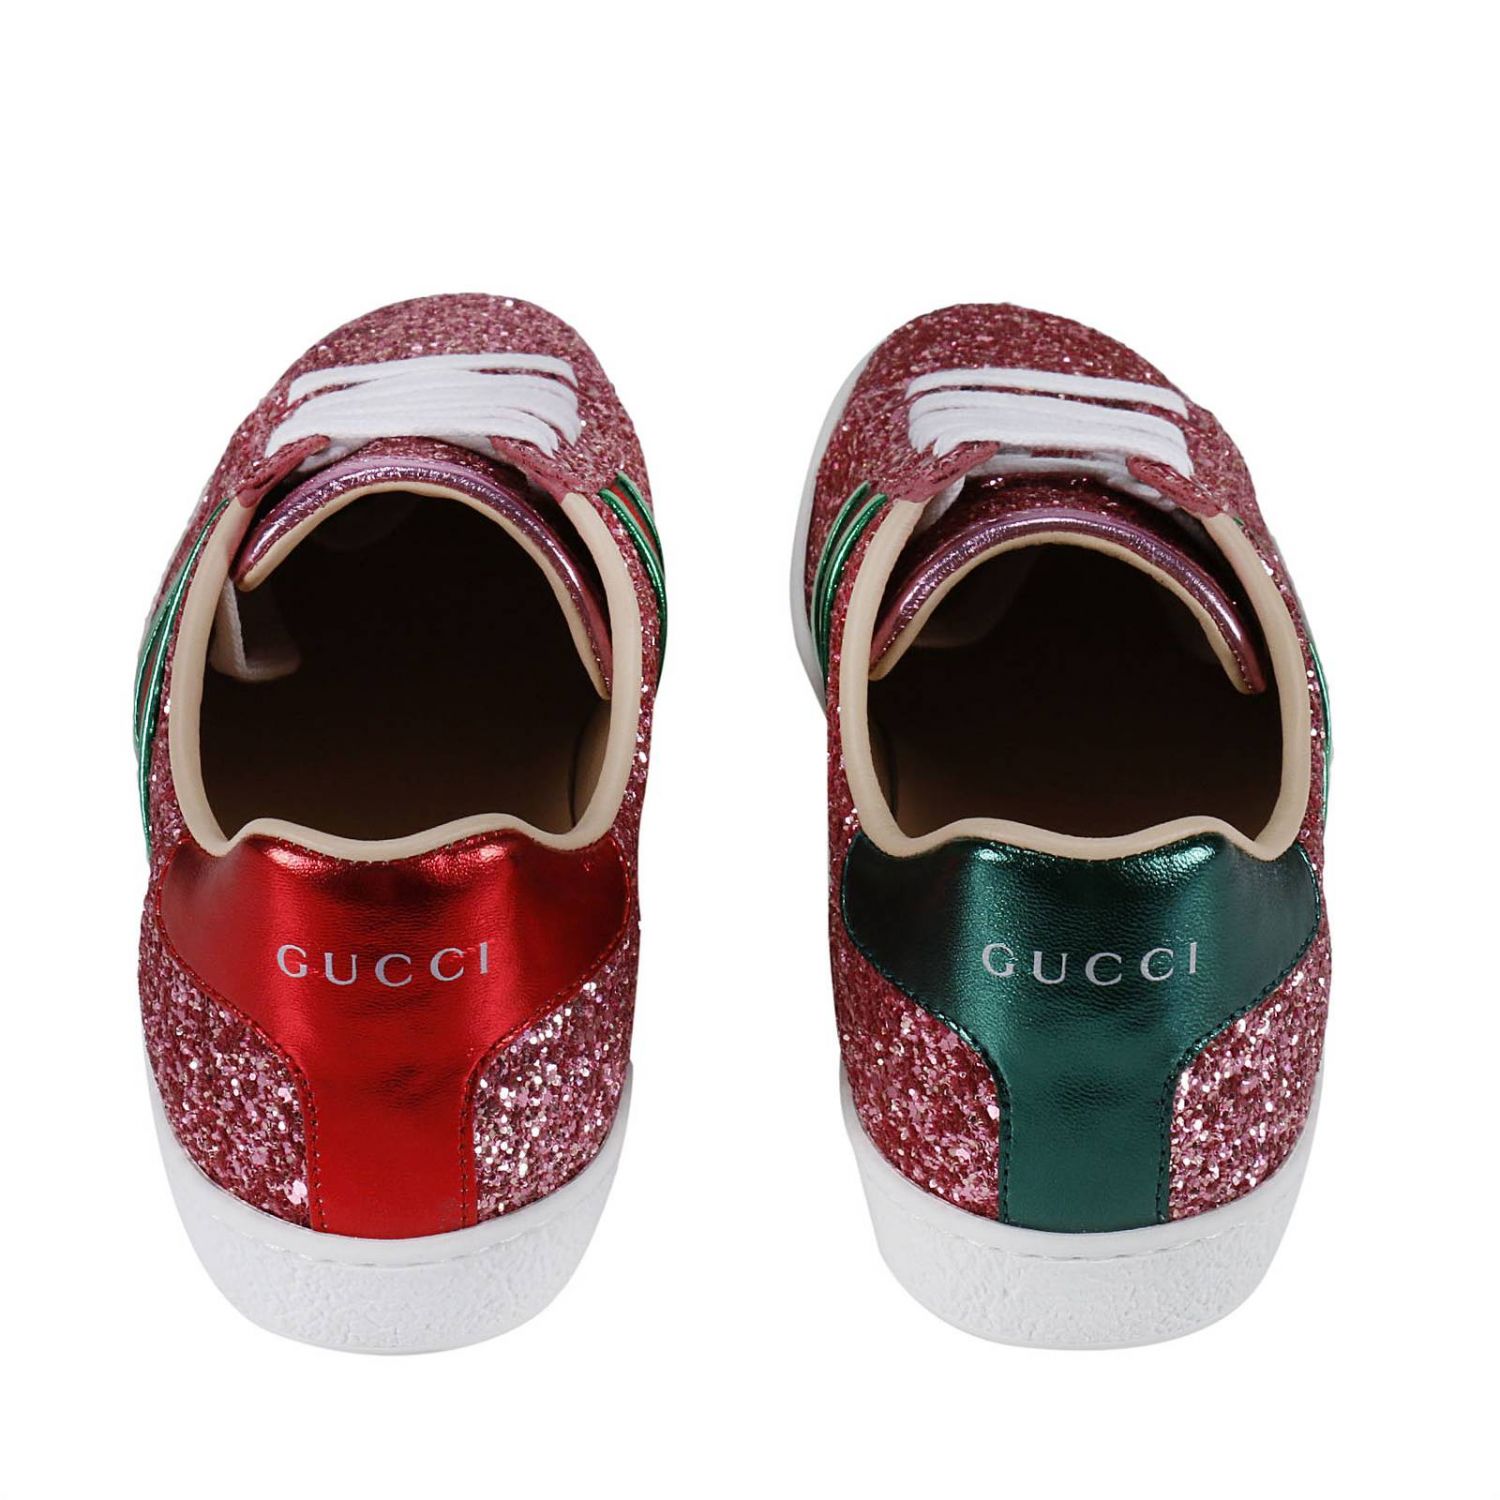 gucci sneakers with roses